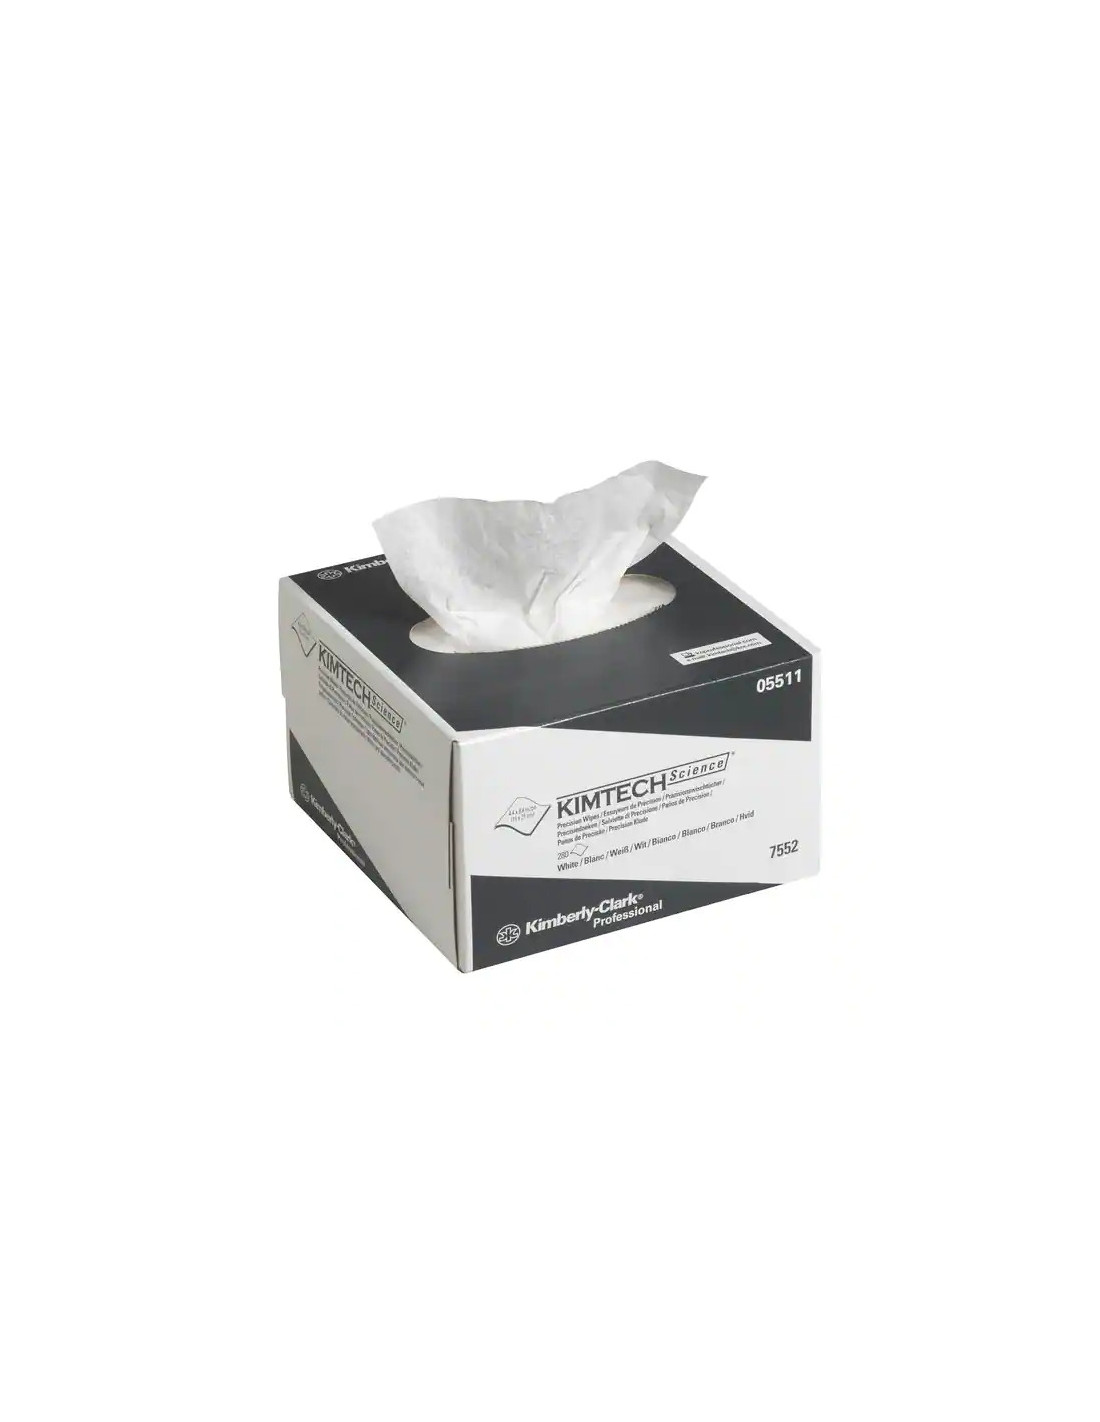 Monitor Wipes - 80 Count